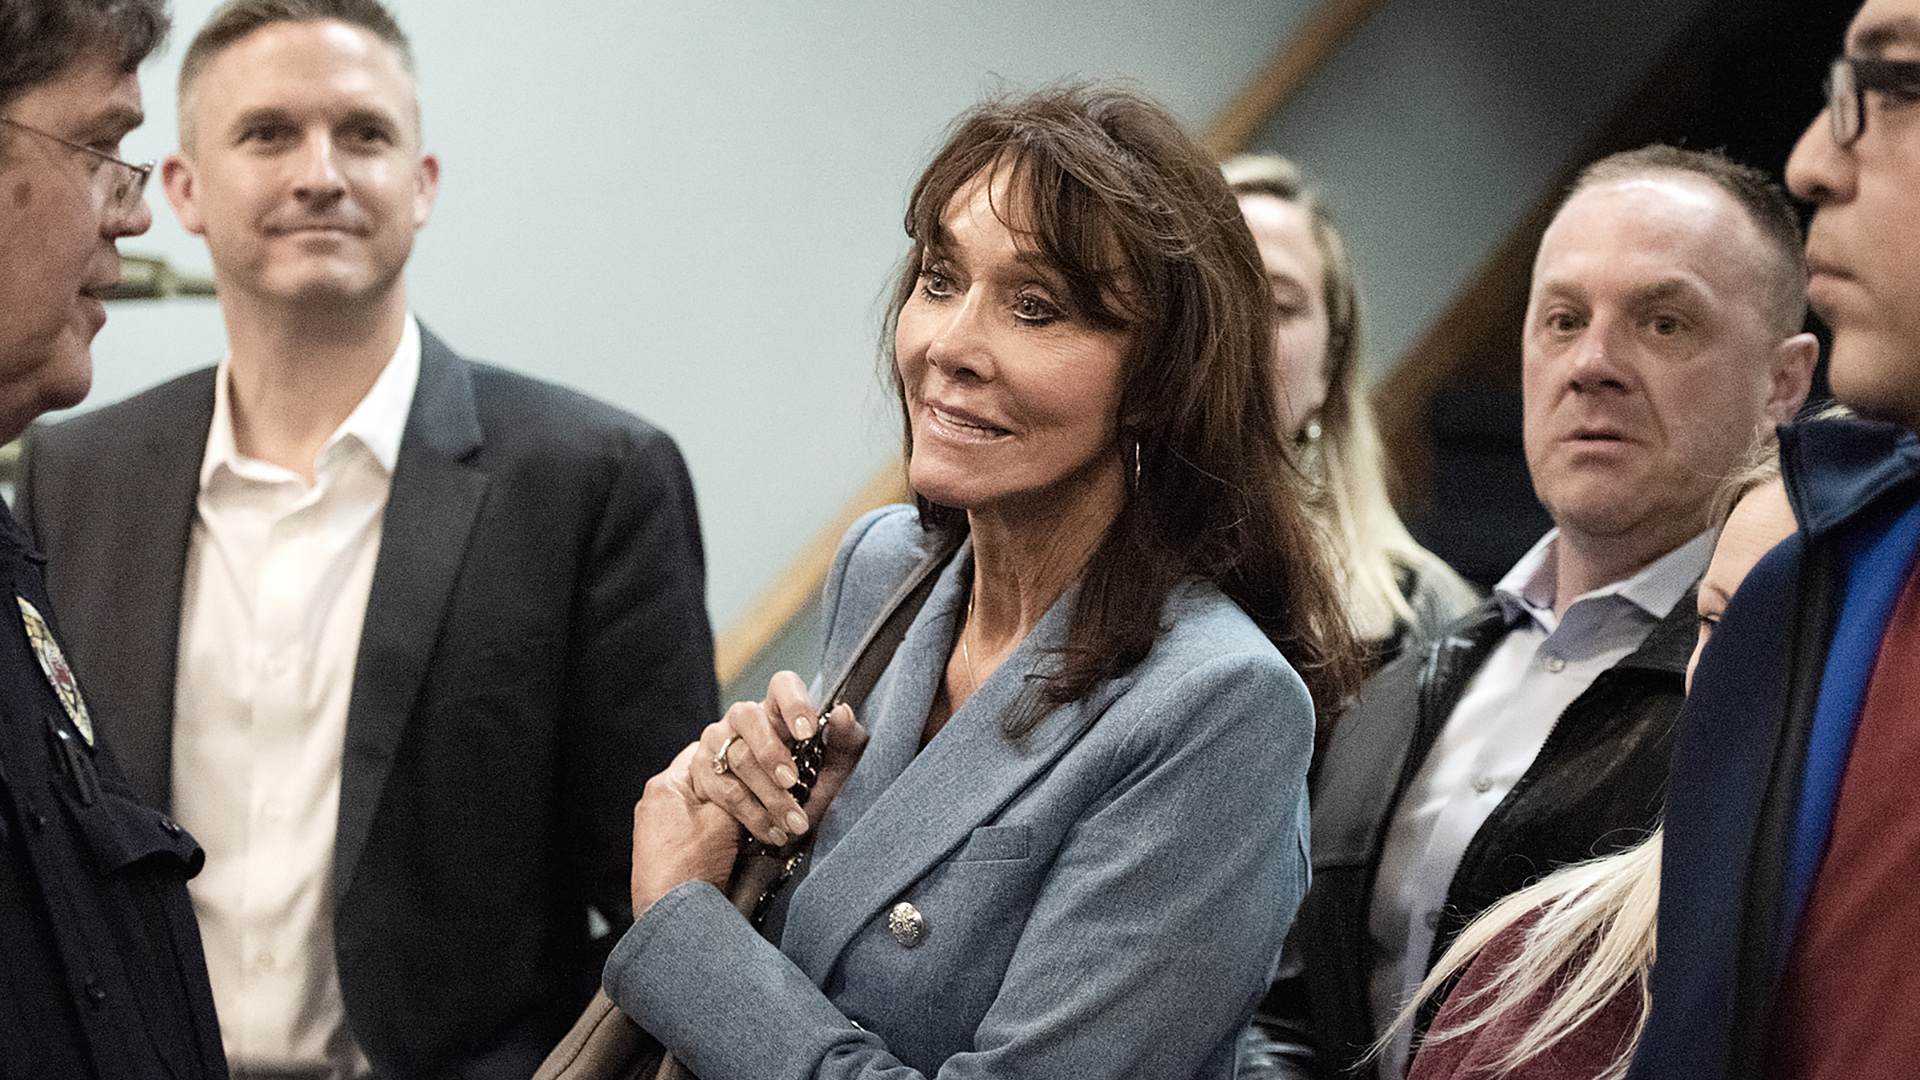 Diane Hendricks stands and speaks to another person, with more people standing to the side and in the background.